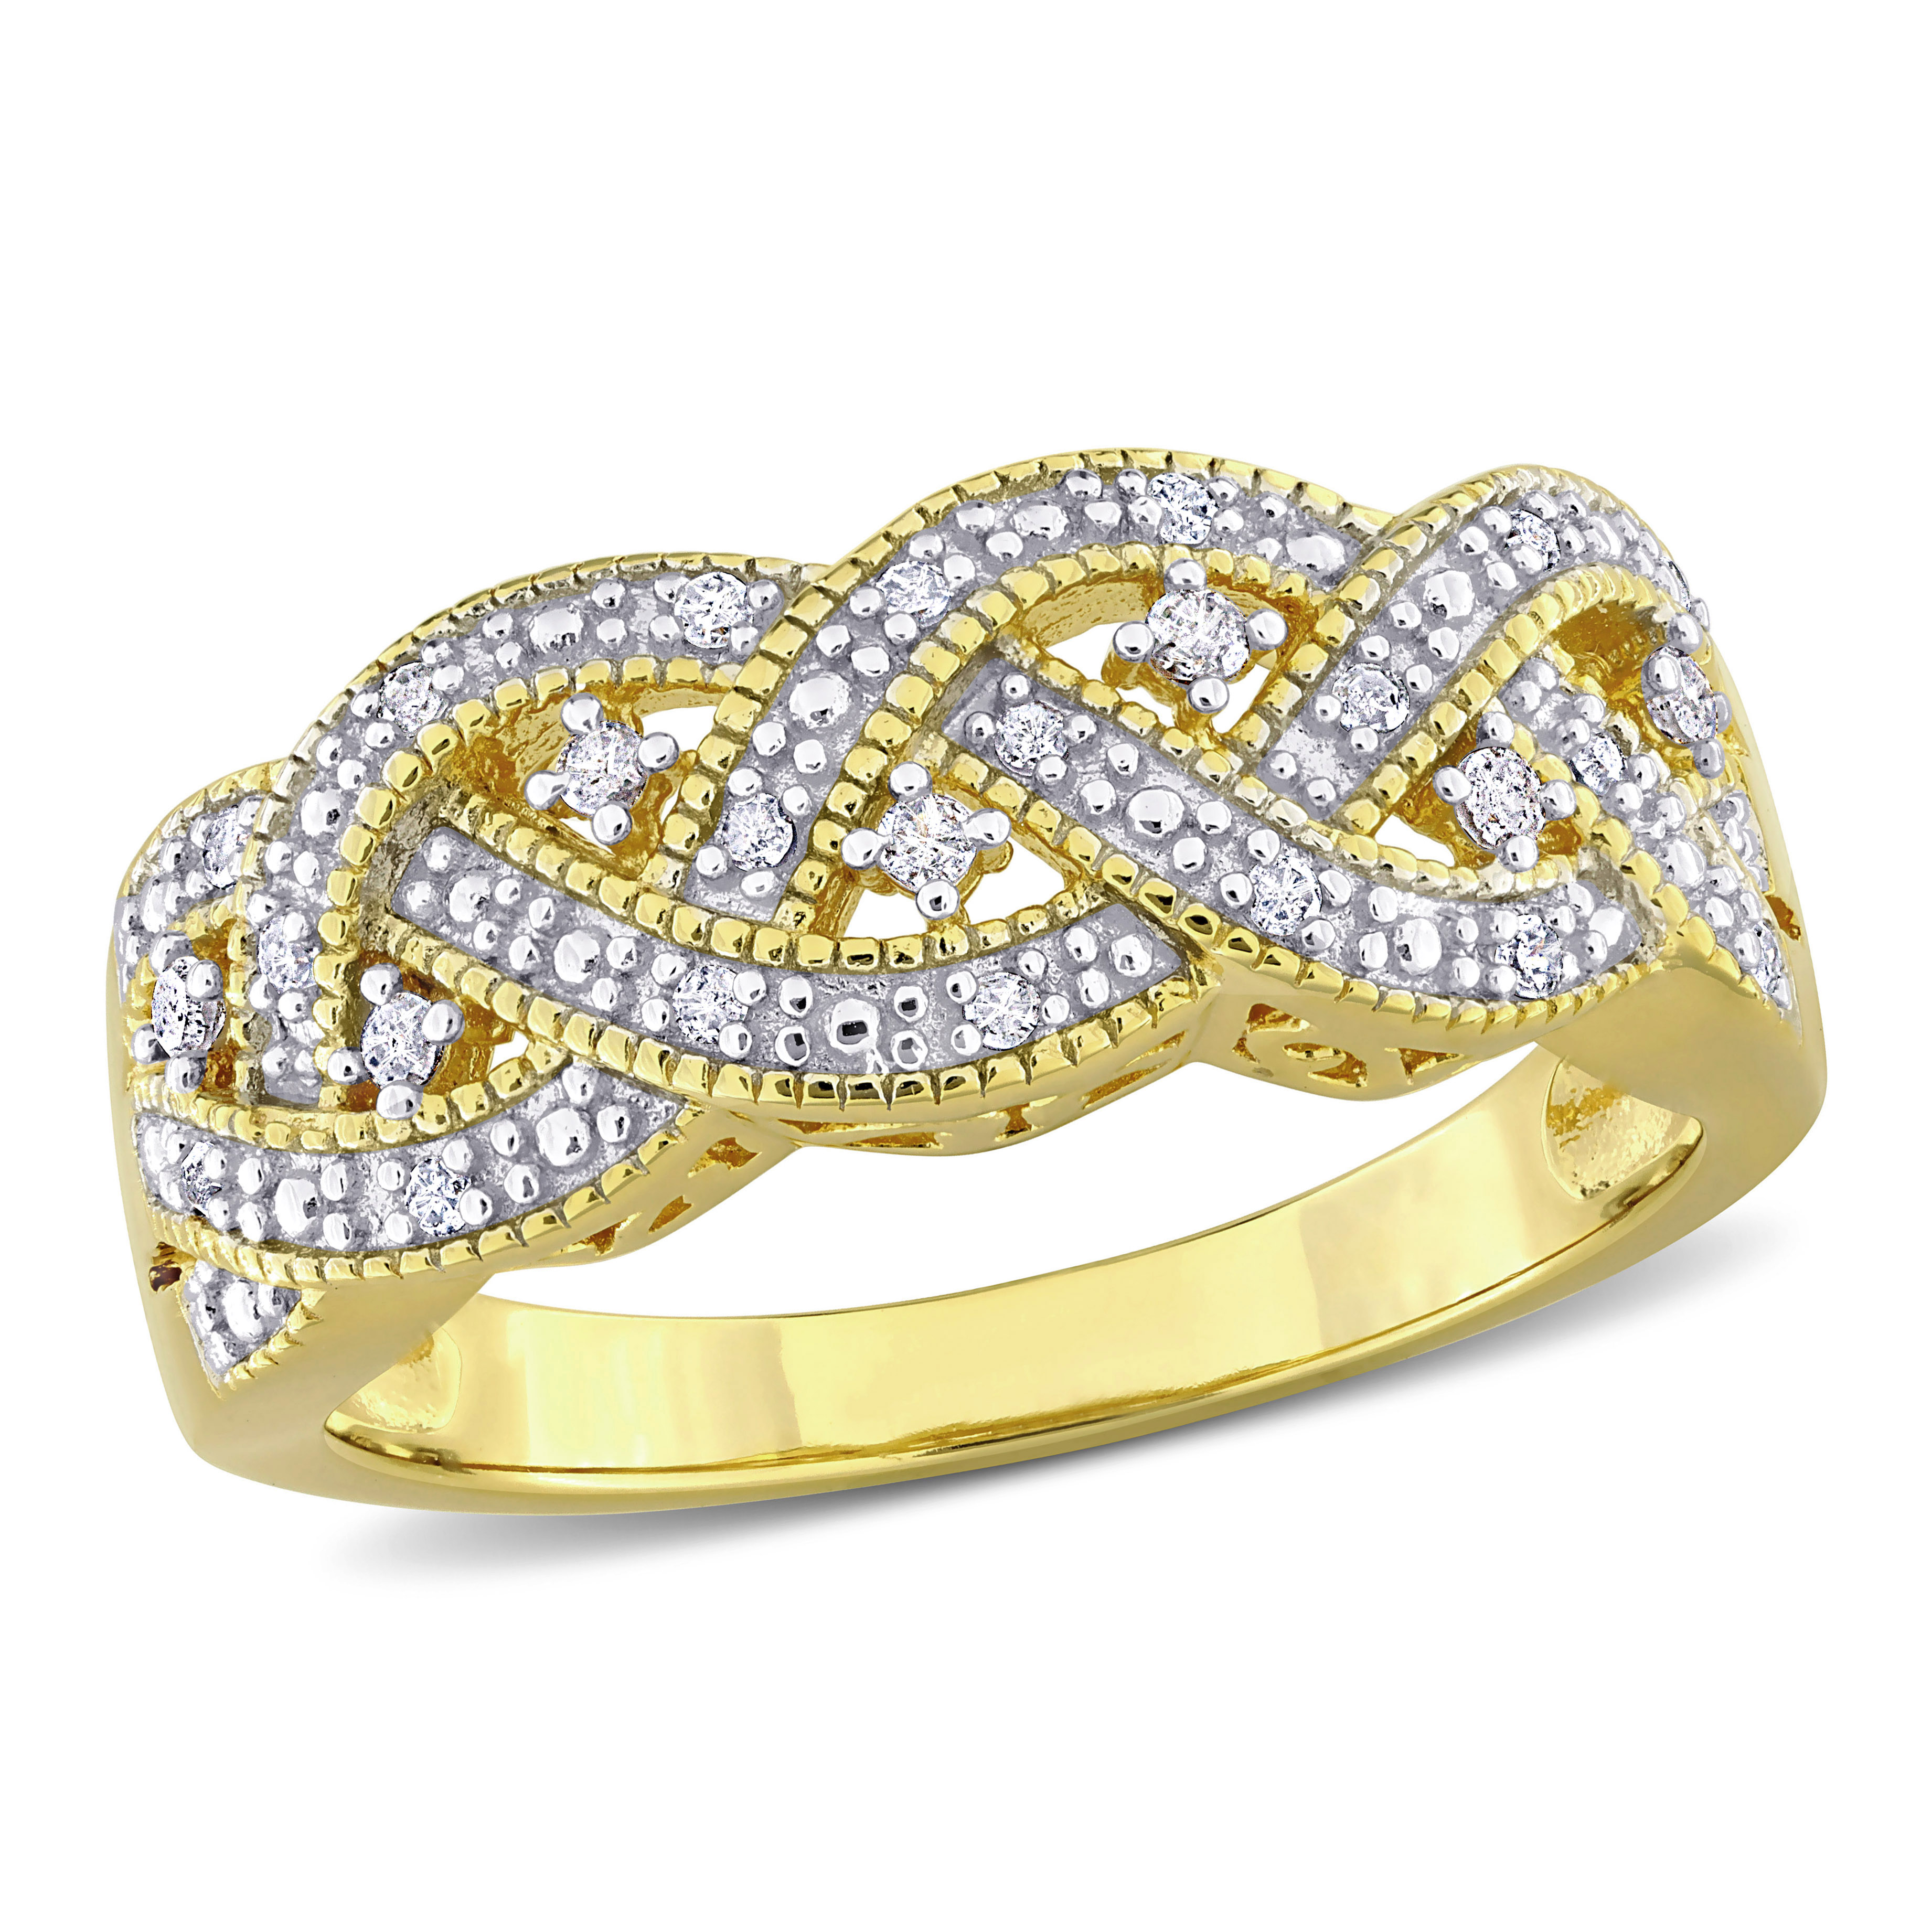 1/8 CT TW Diamond Braided Ring in Yellow Plated Sterling Silver